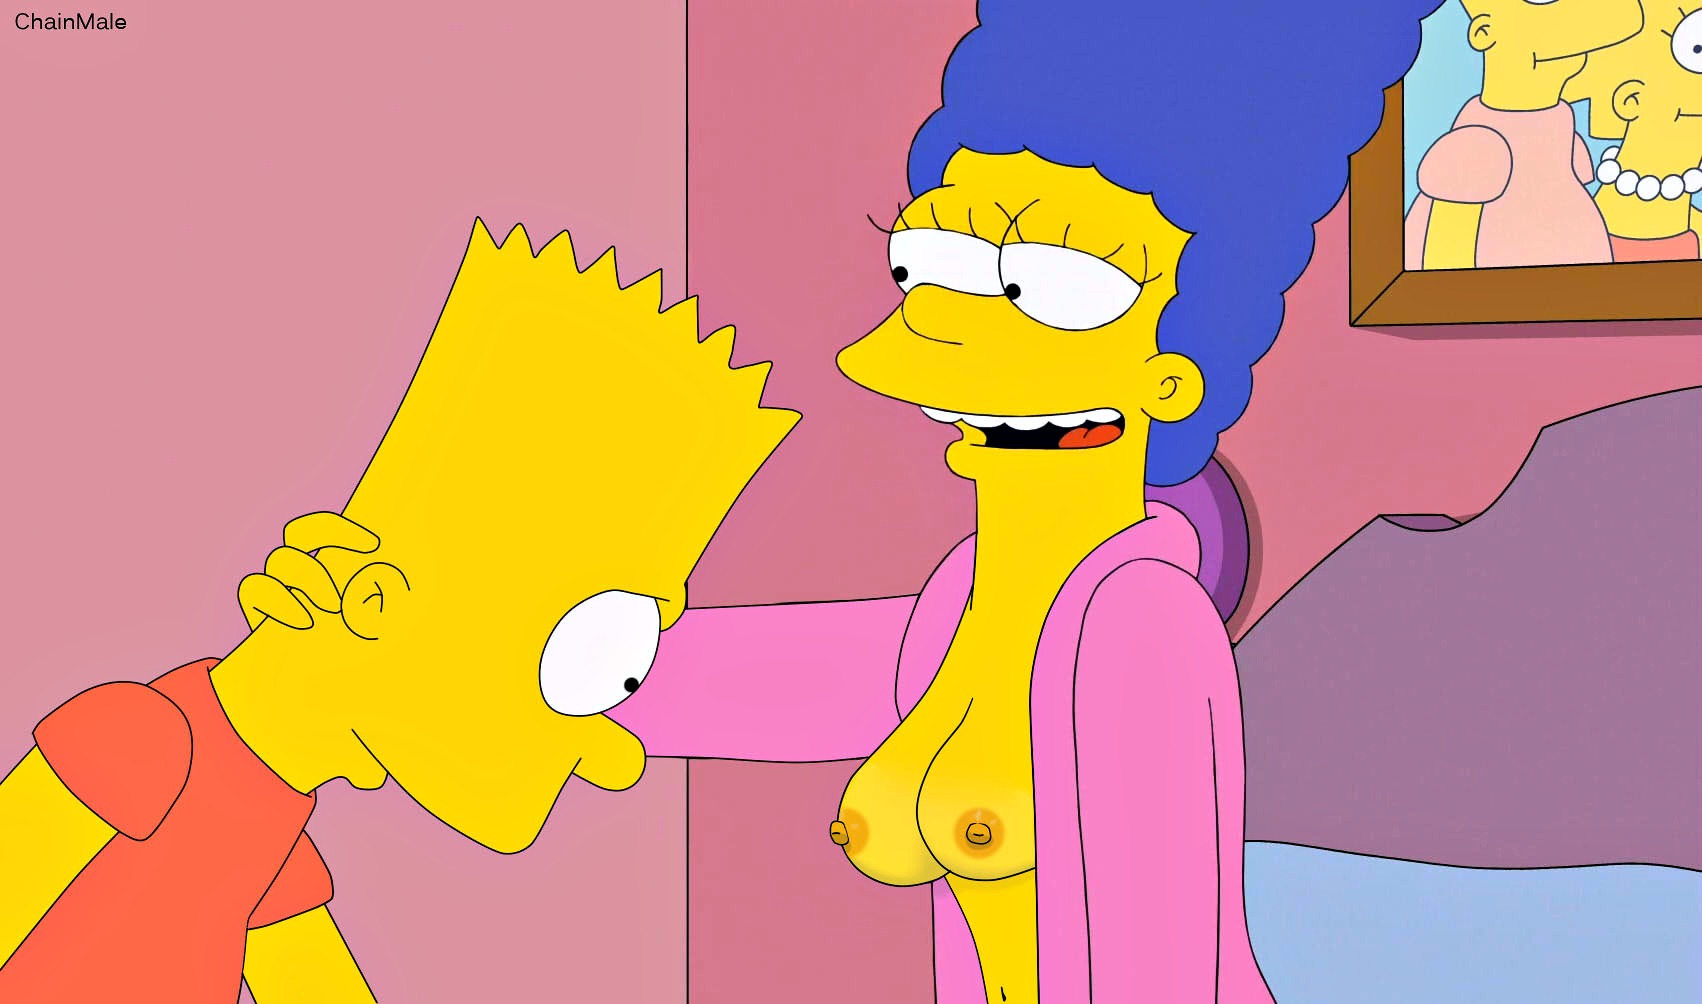 Pic1307779 Bart Simpson Chainmale Marge Simpson The Simpsons Simpsons Adult Comics